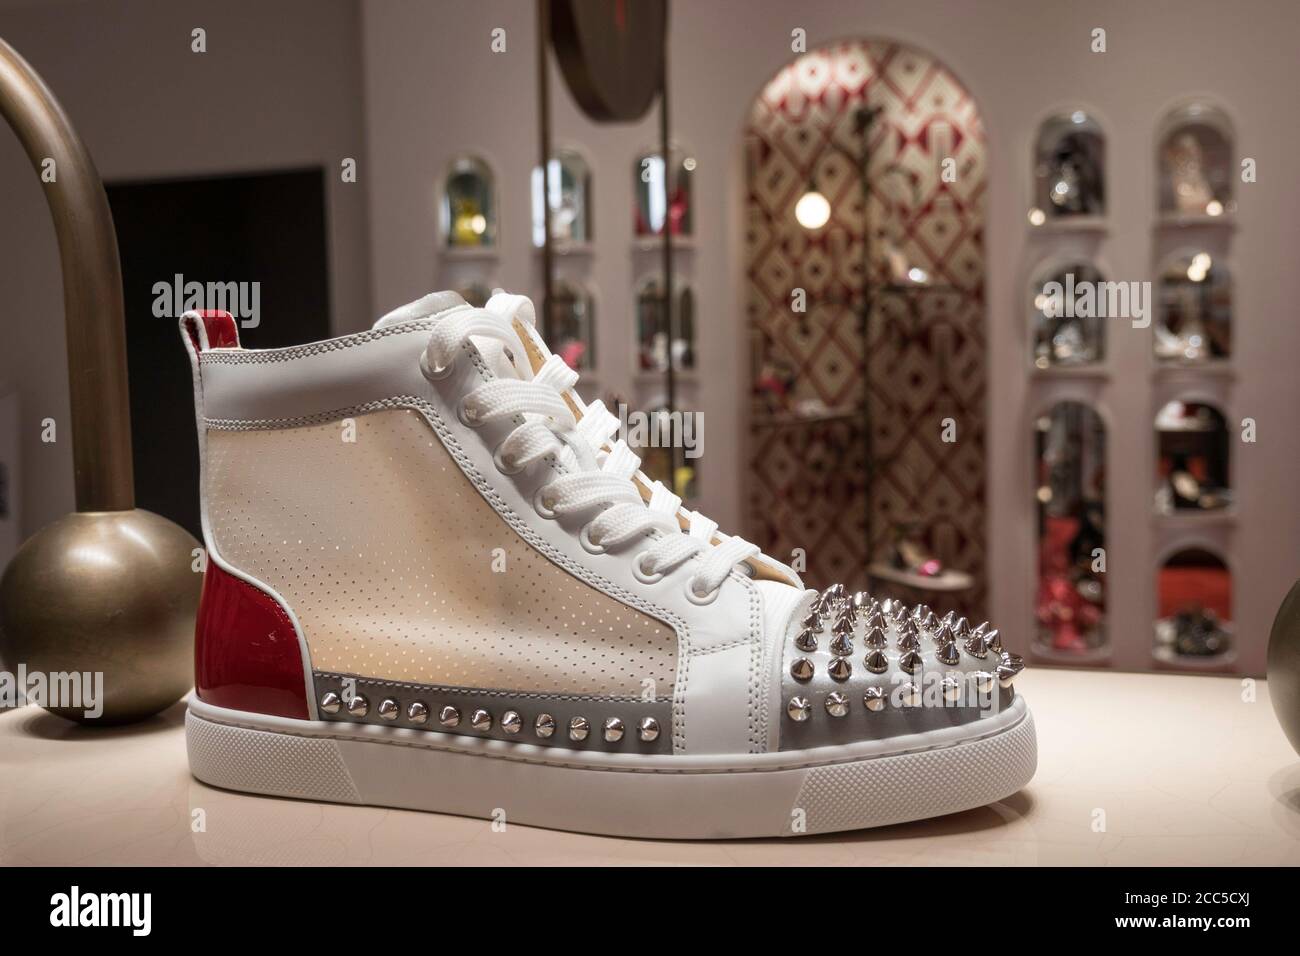 A Look at Christian Louboutin's New Boutique in Houston – Footwear